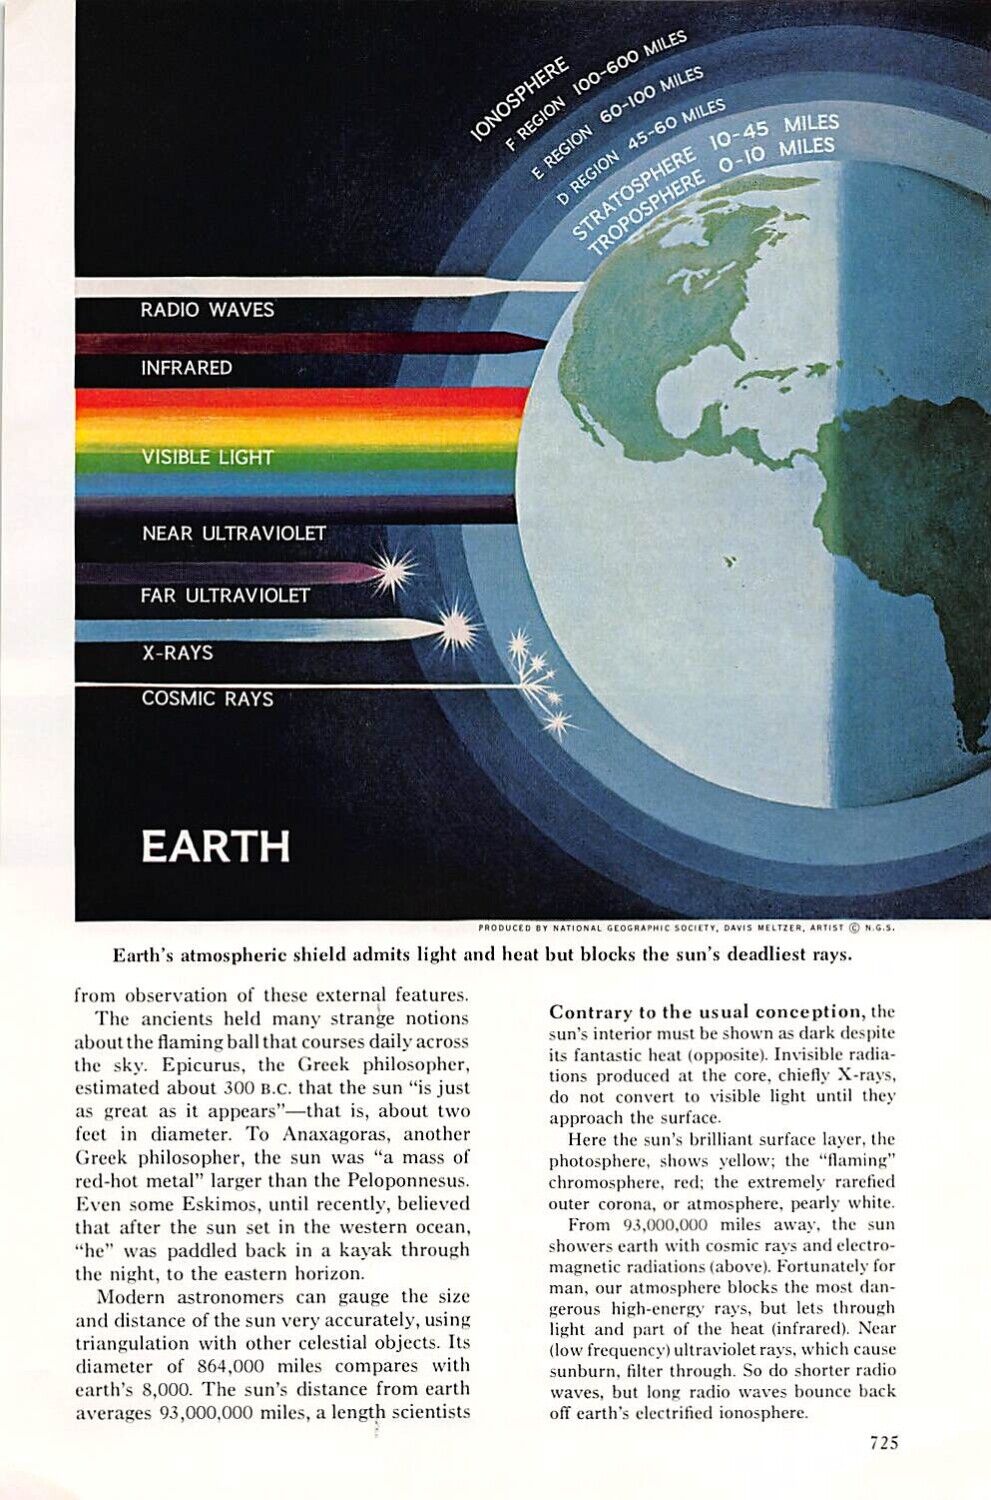 Print Ad 1965 Earth's atmospheric shield admits light and heat but blocks